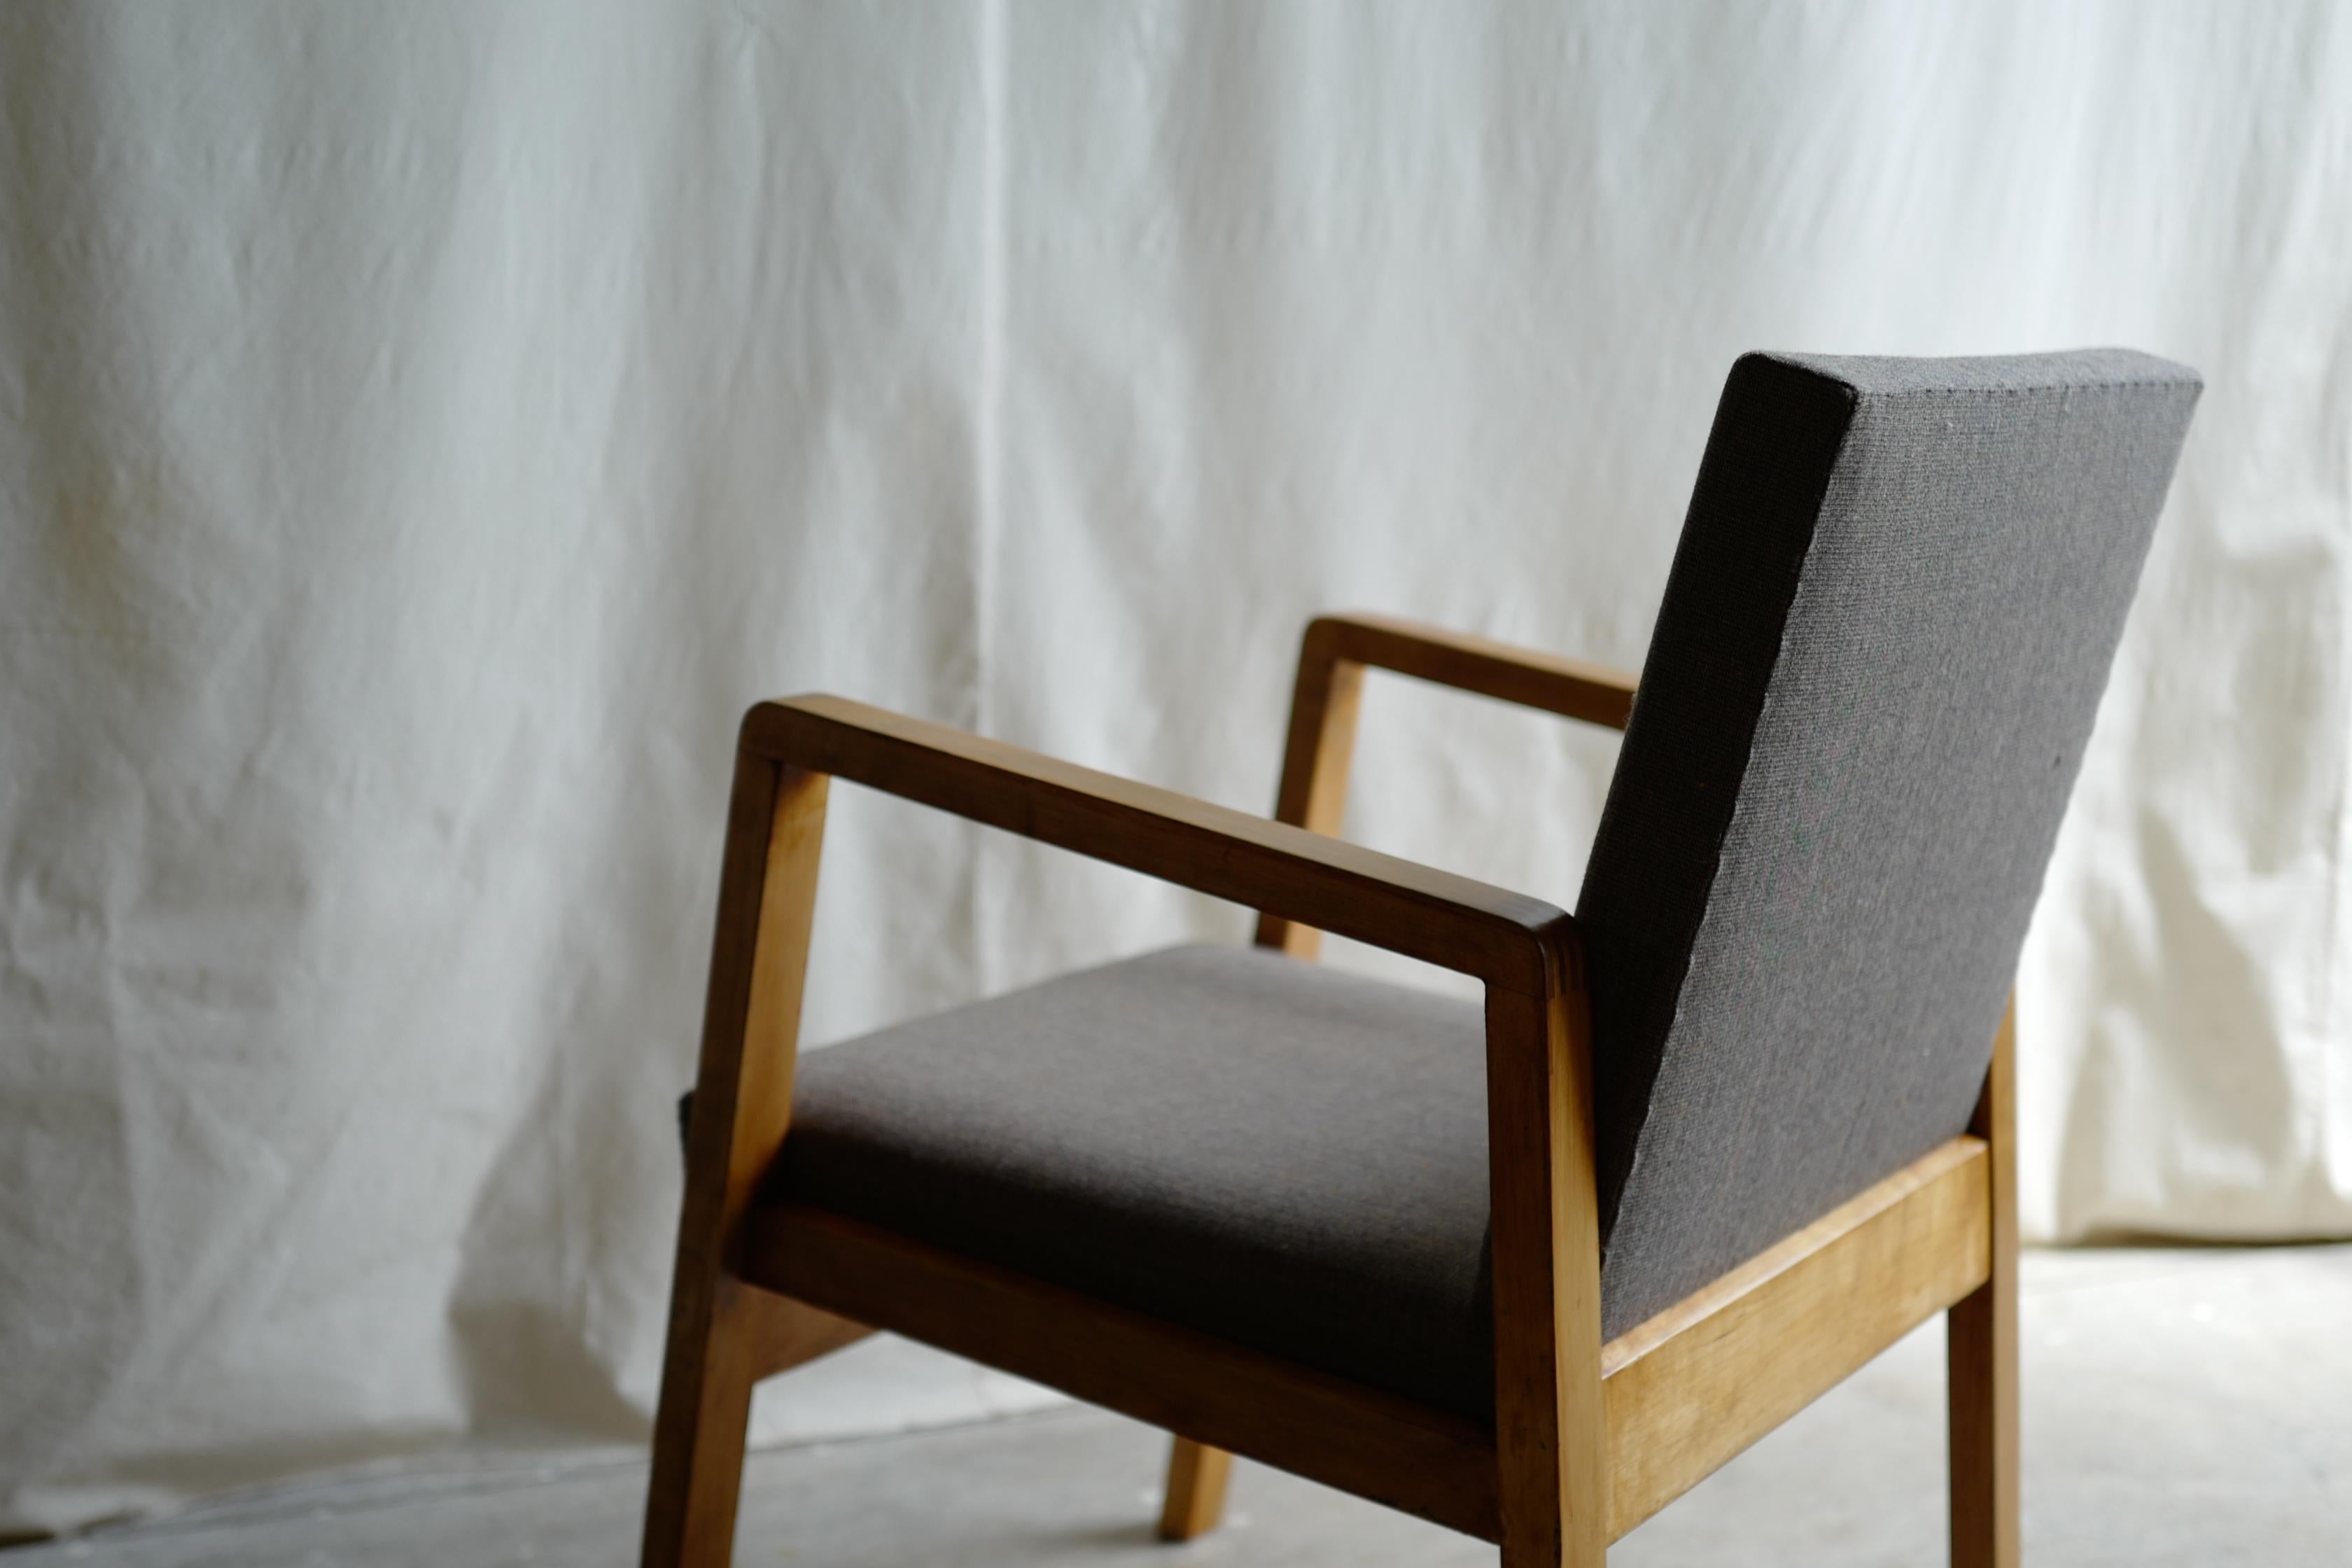 40s 403 hallway chair.
Upholstery by Kvadrat canvas.